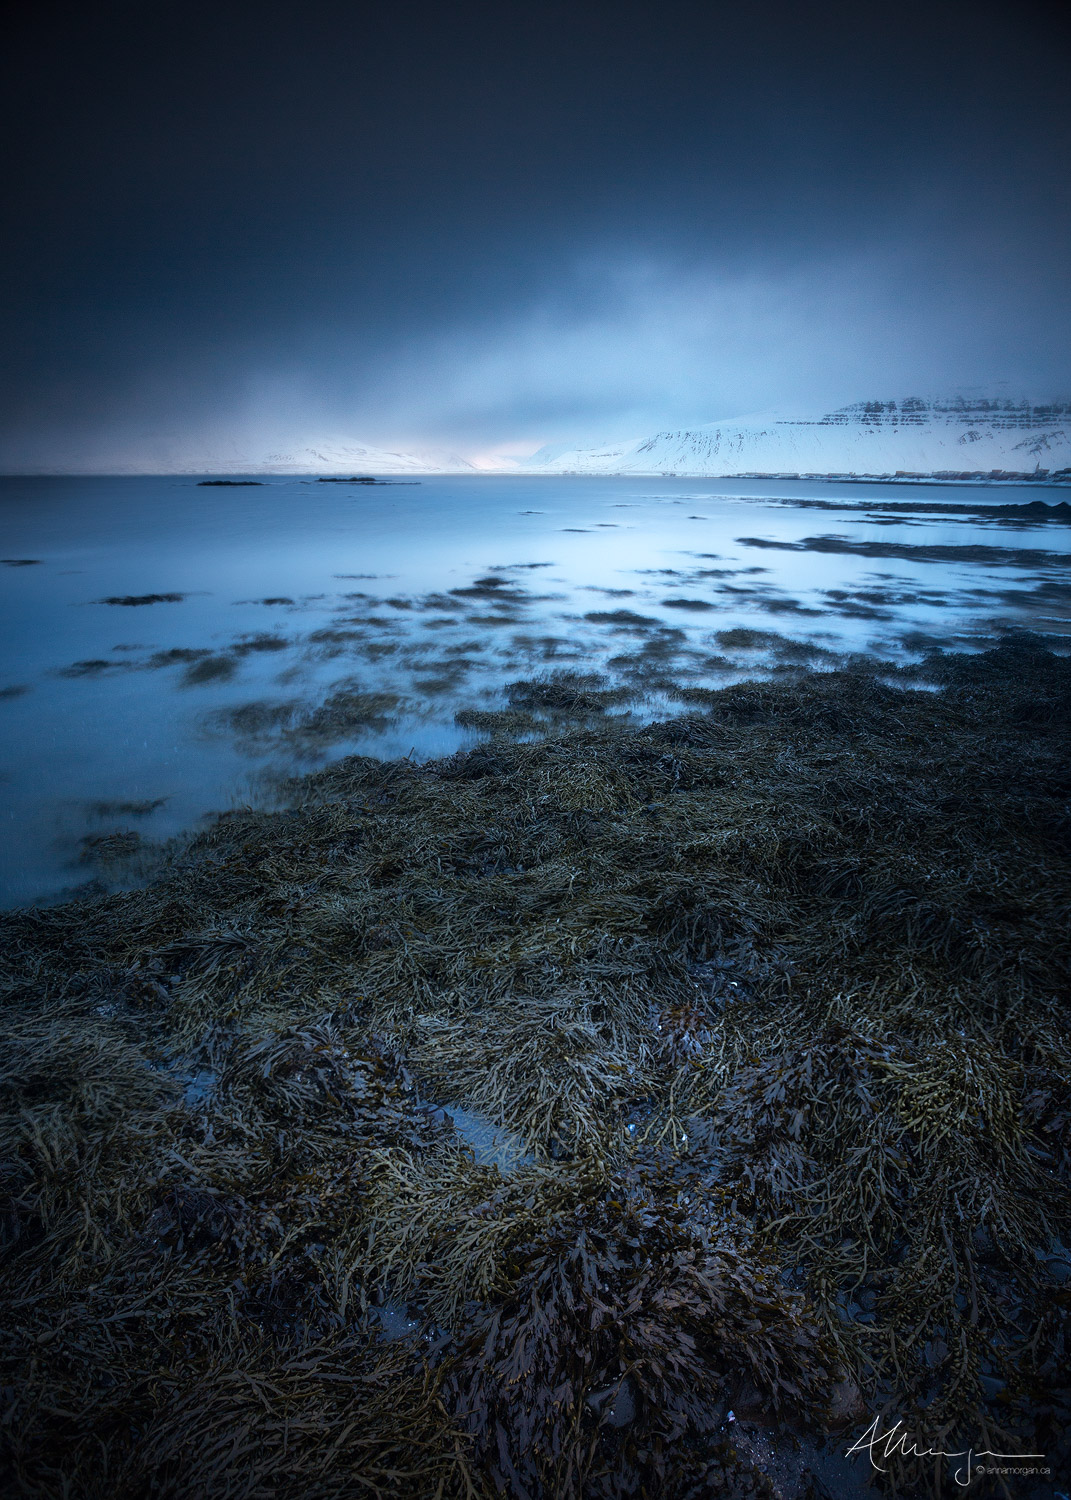 A cloudy and moody blue hour on the coast near Kirkjufell mountain in Iceland at low tide with sea weed and kelp exposed on the shoreline